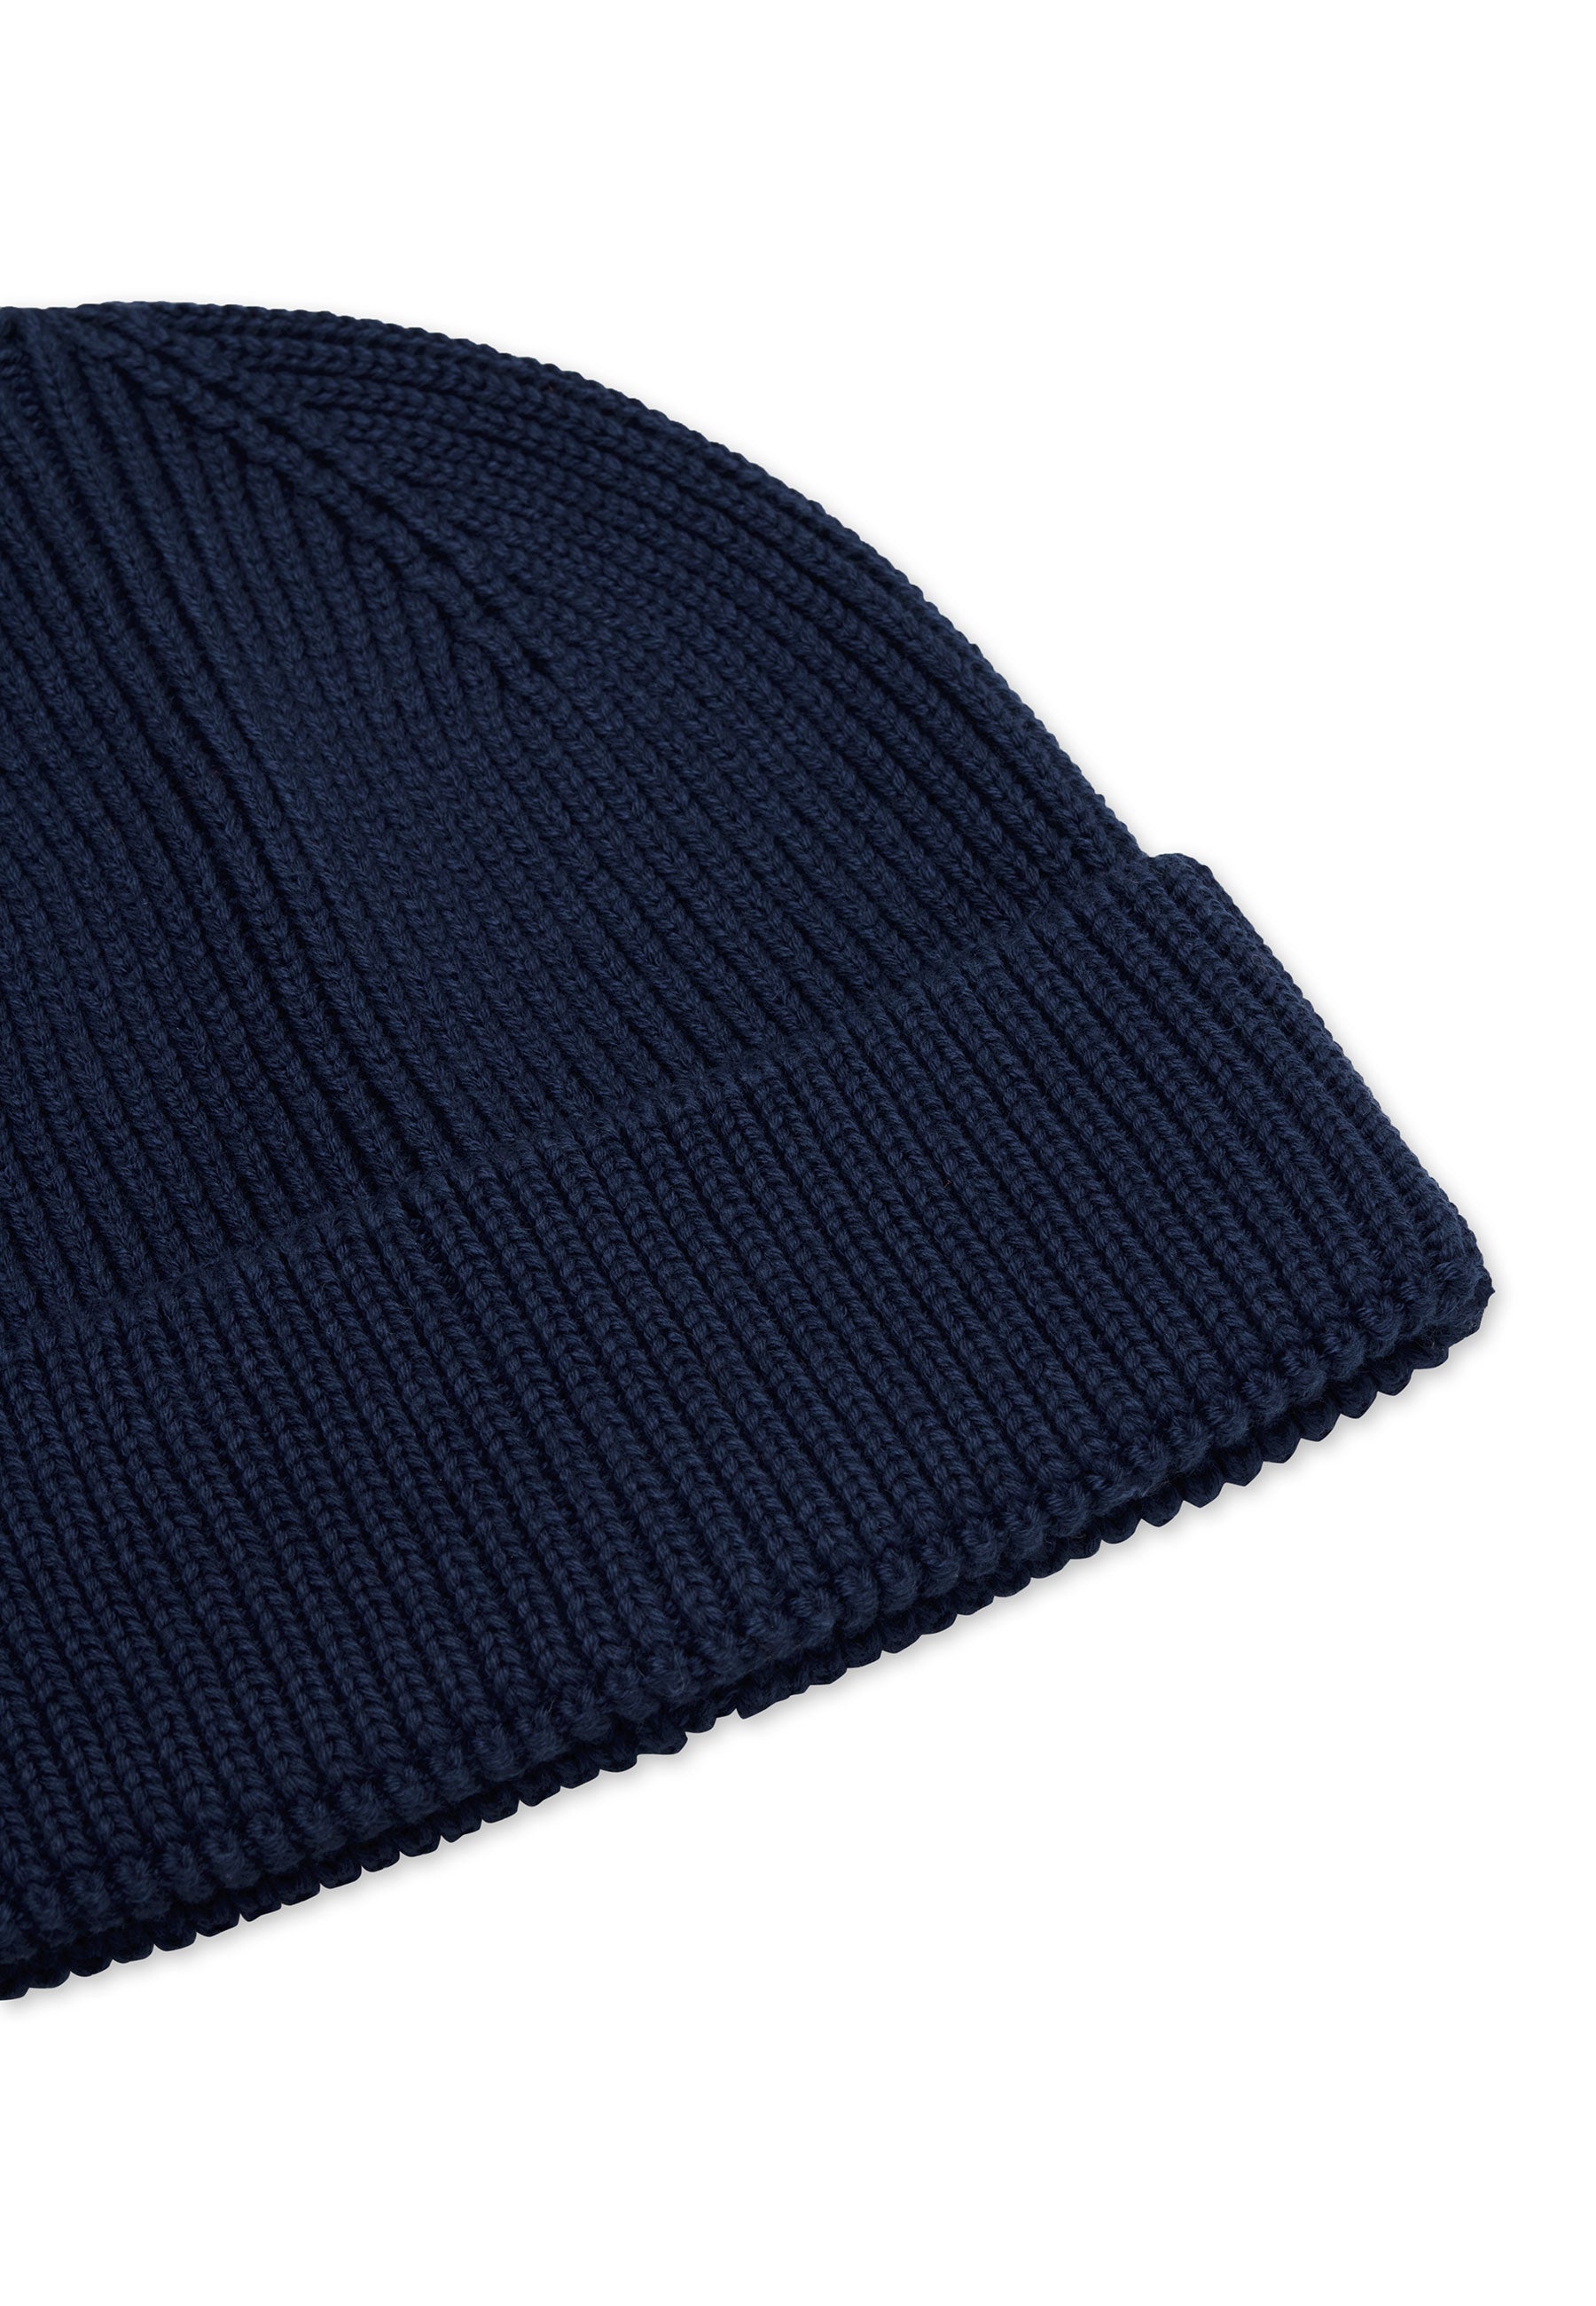 WMHENRY BEANIE in Navy